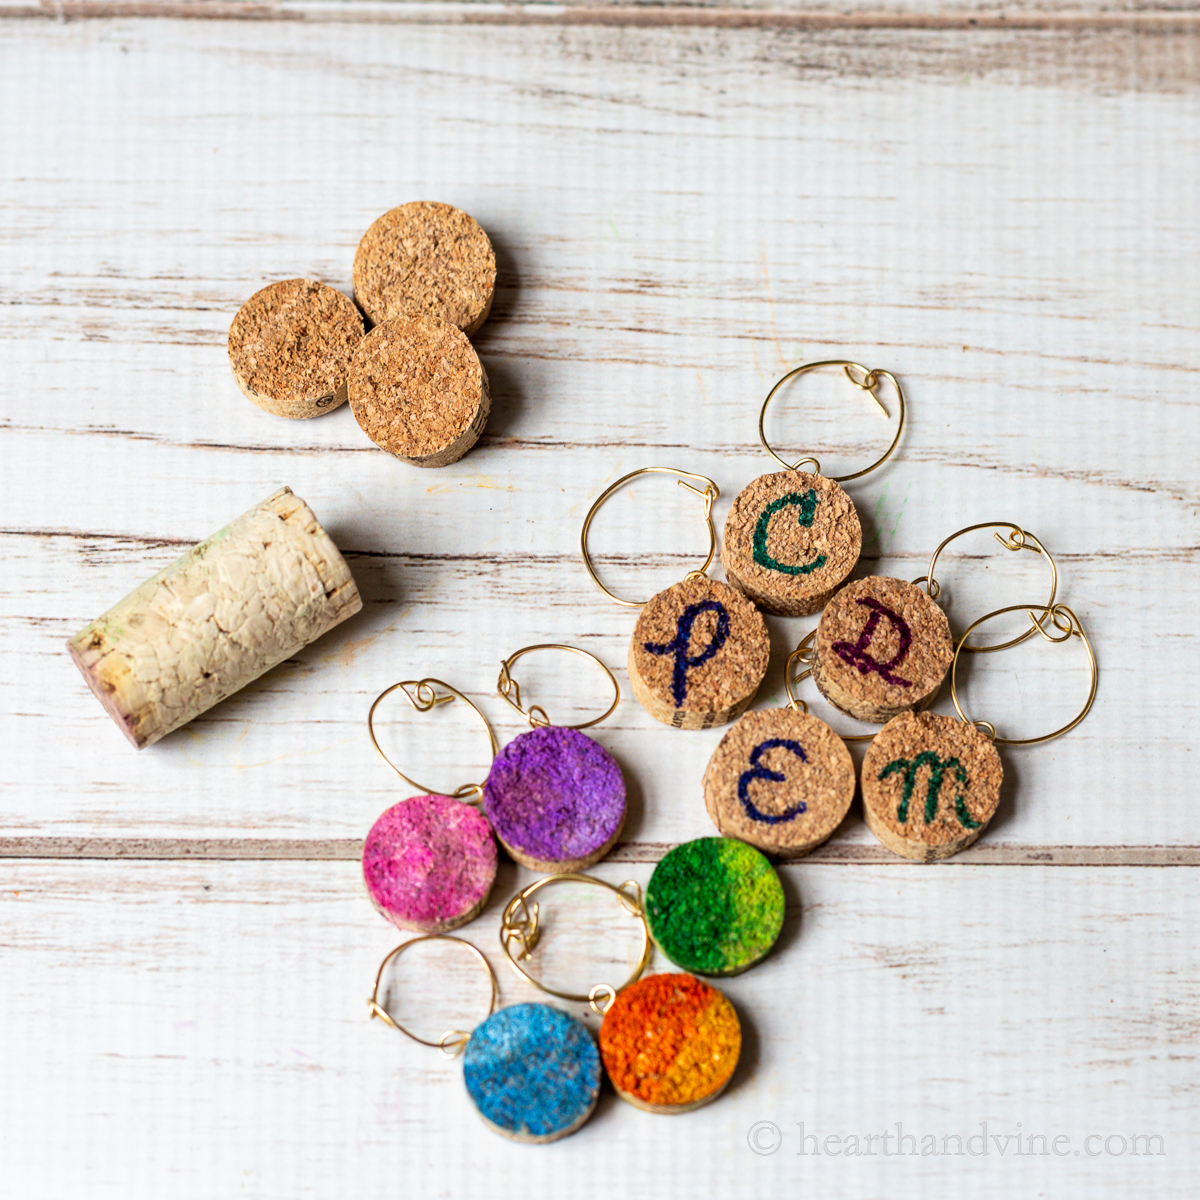 DIY wine charms made with wire and slices of wine corks.